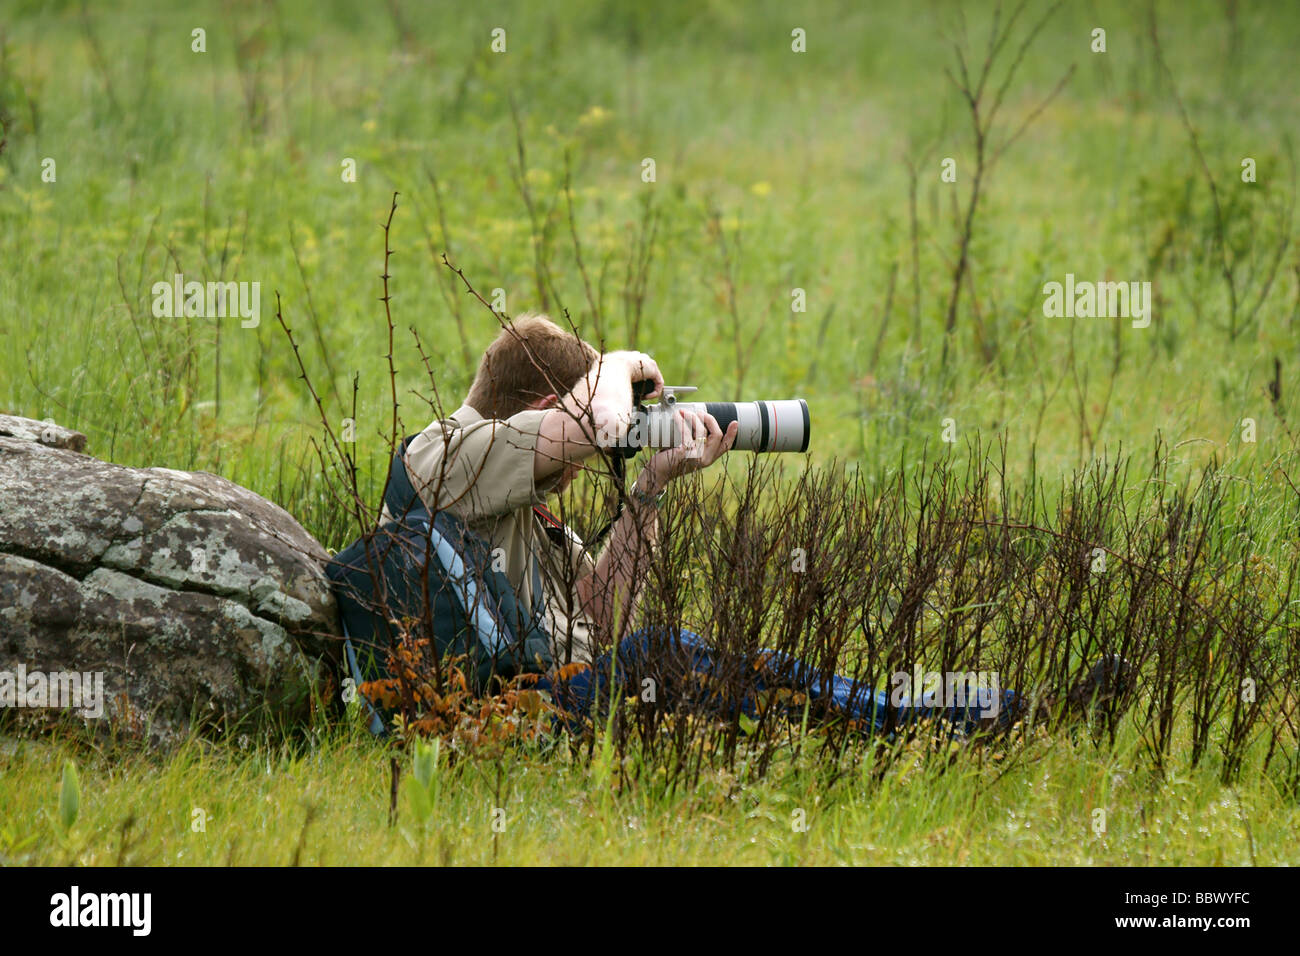 A wildlife photographer sitting in the field taking nature photographs. Stock Photo